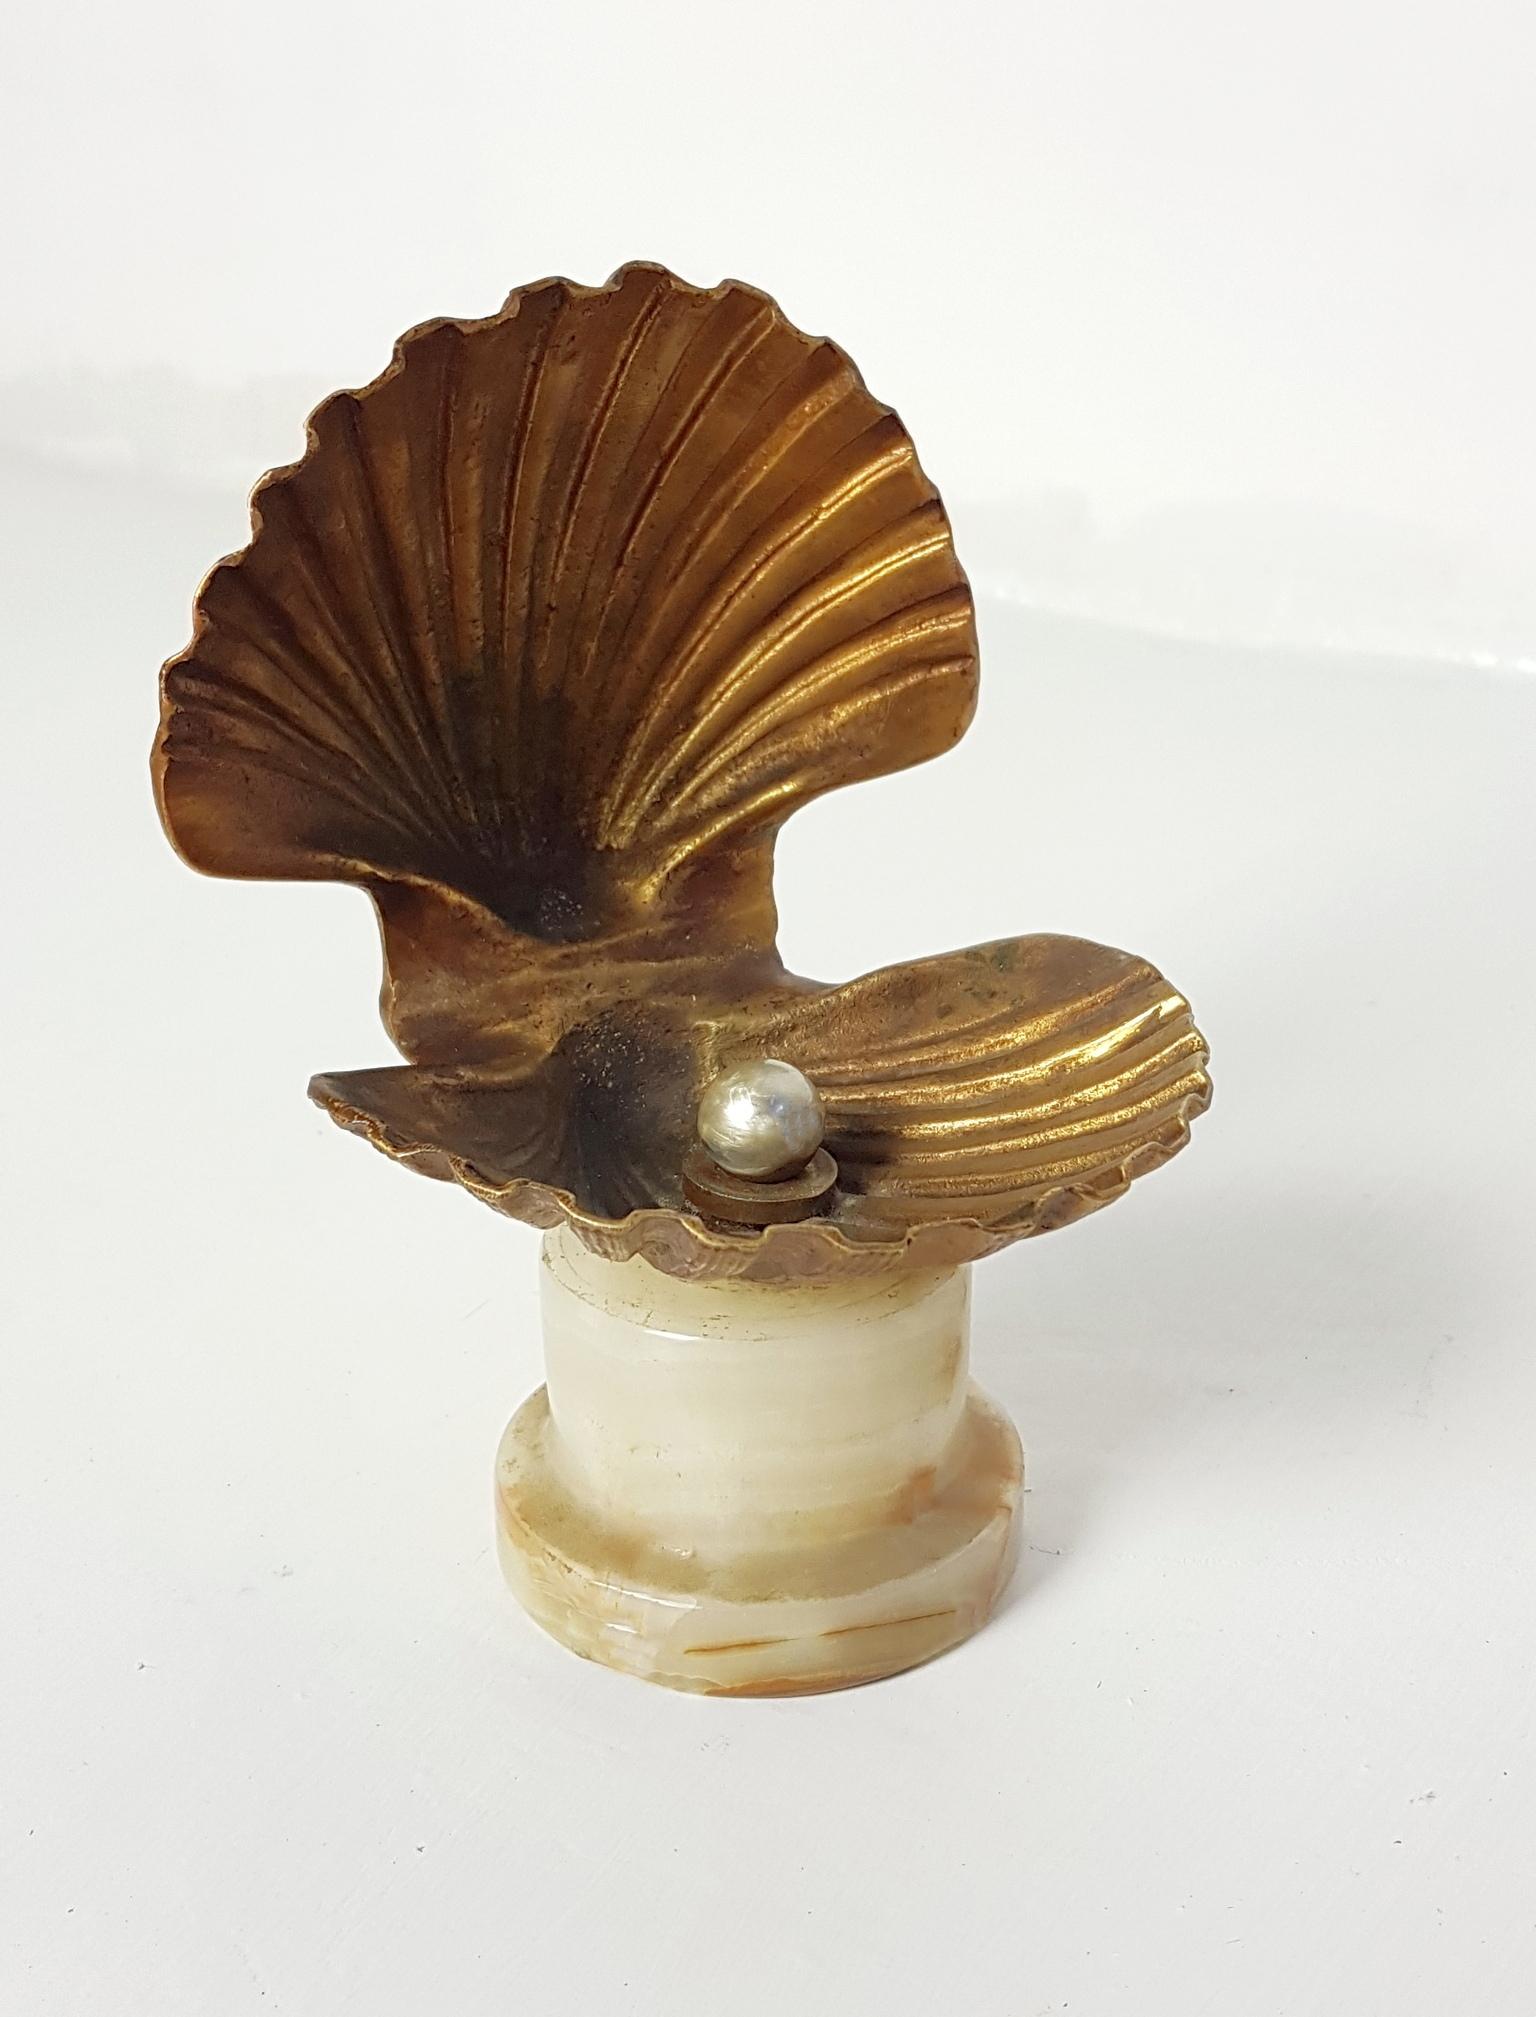 Decorative clam shell in cast bronze holding a faux pearl mounted on an onyx base. Can be used for trinkets, jewelry or an ashtray.